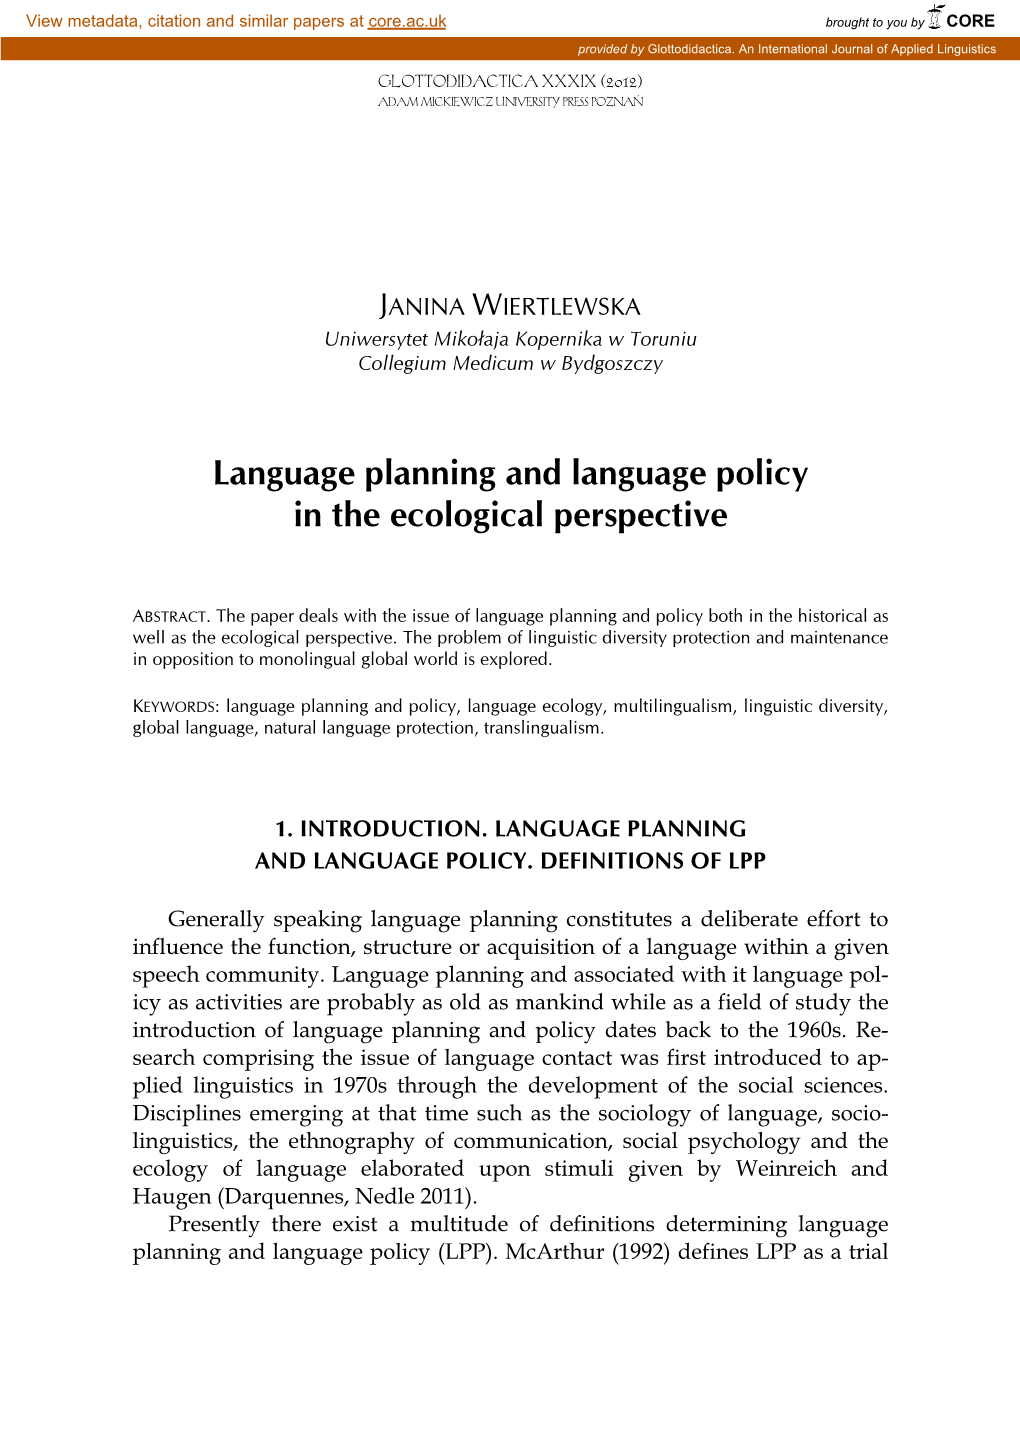 Language Planning and Language Policy in the Ecological Perspective